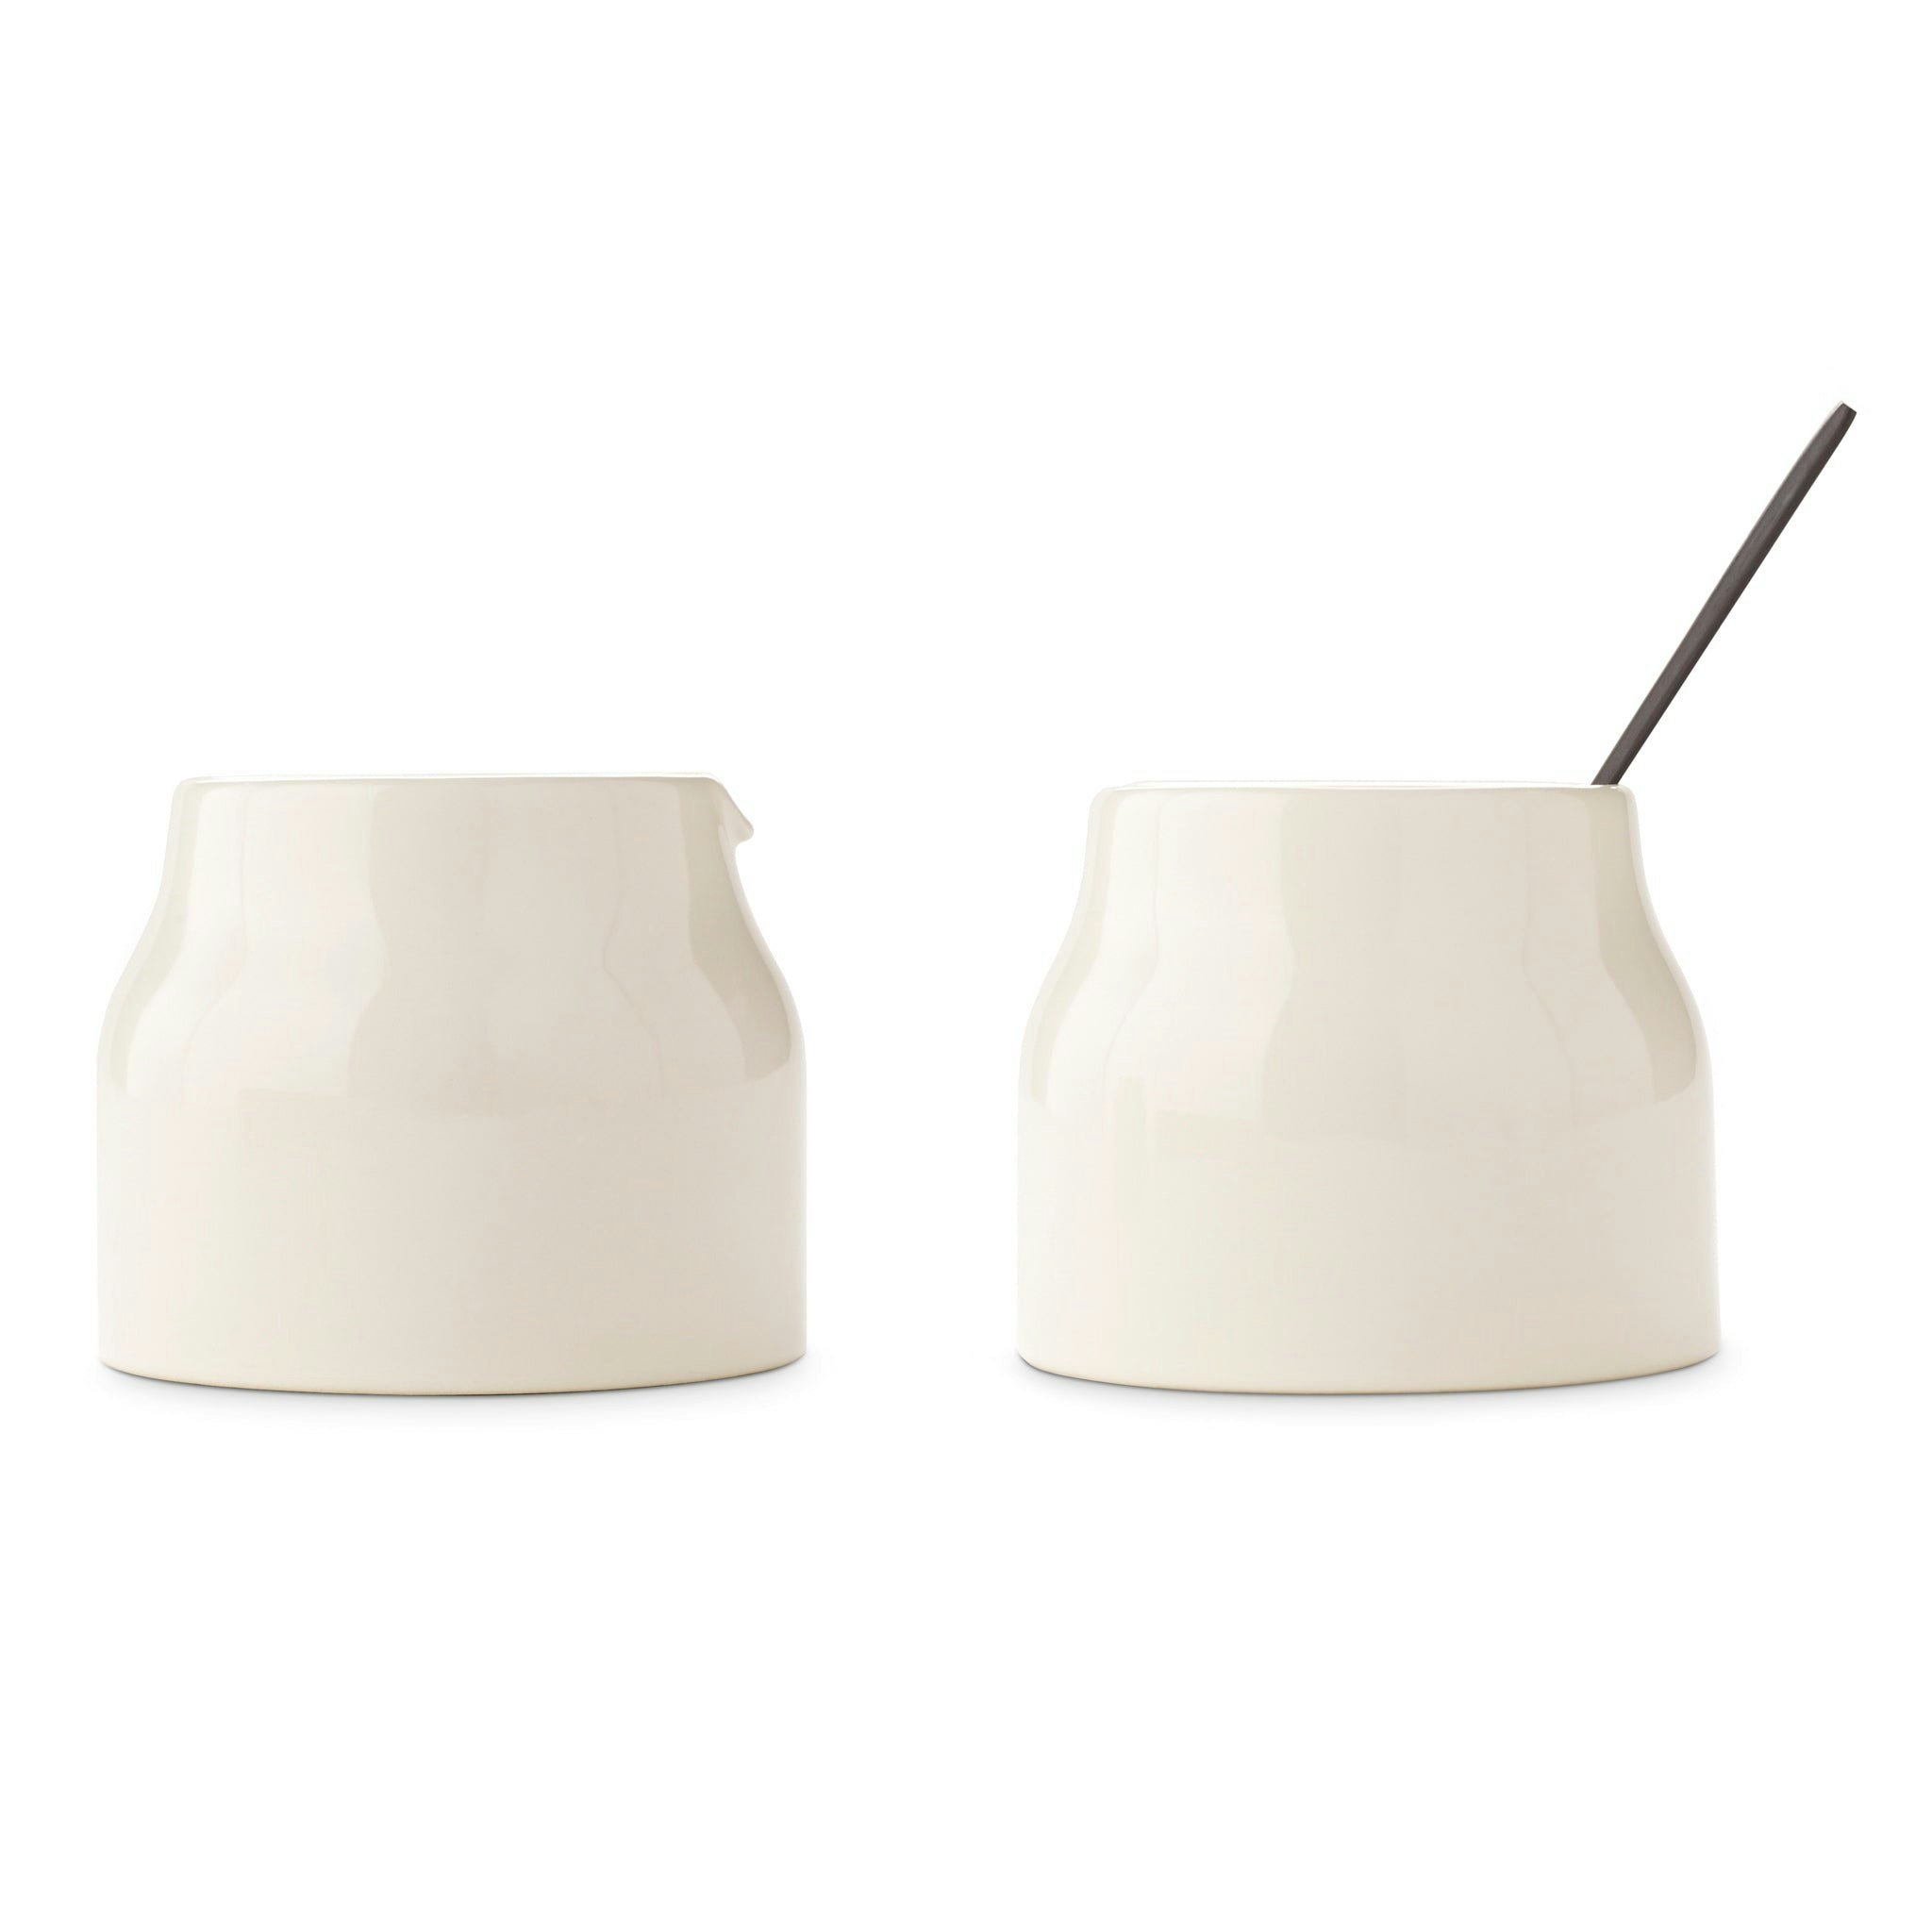 Milk and Sugar Set by John Pawson for When Objects Work